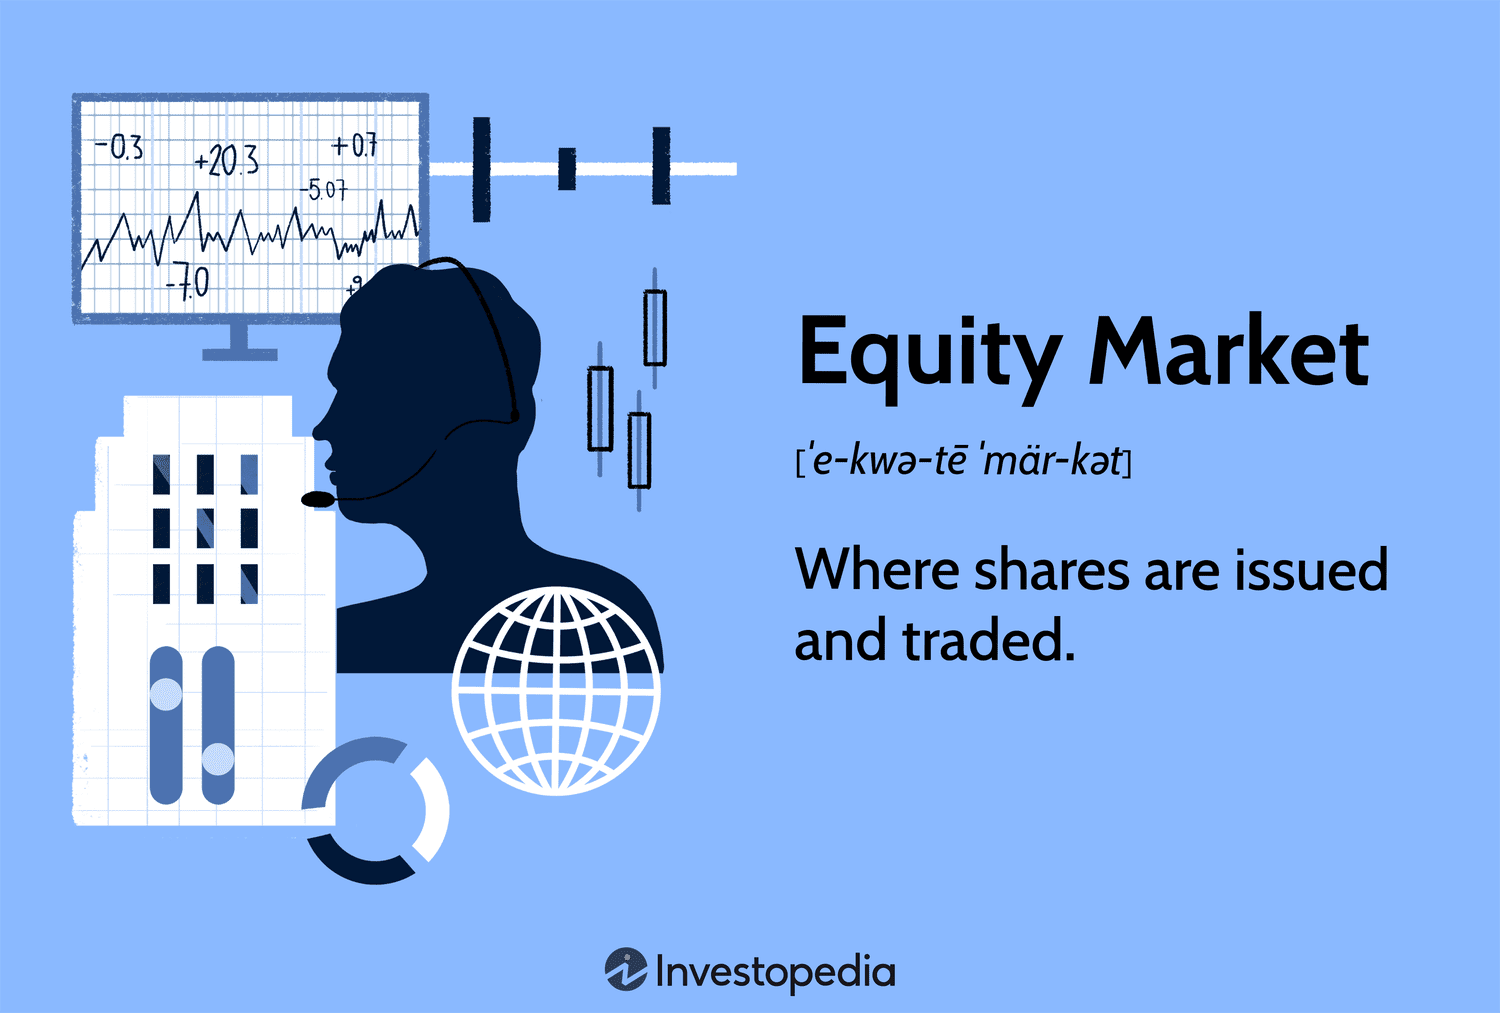 Equity Market: Where shares are issued and traded.